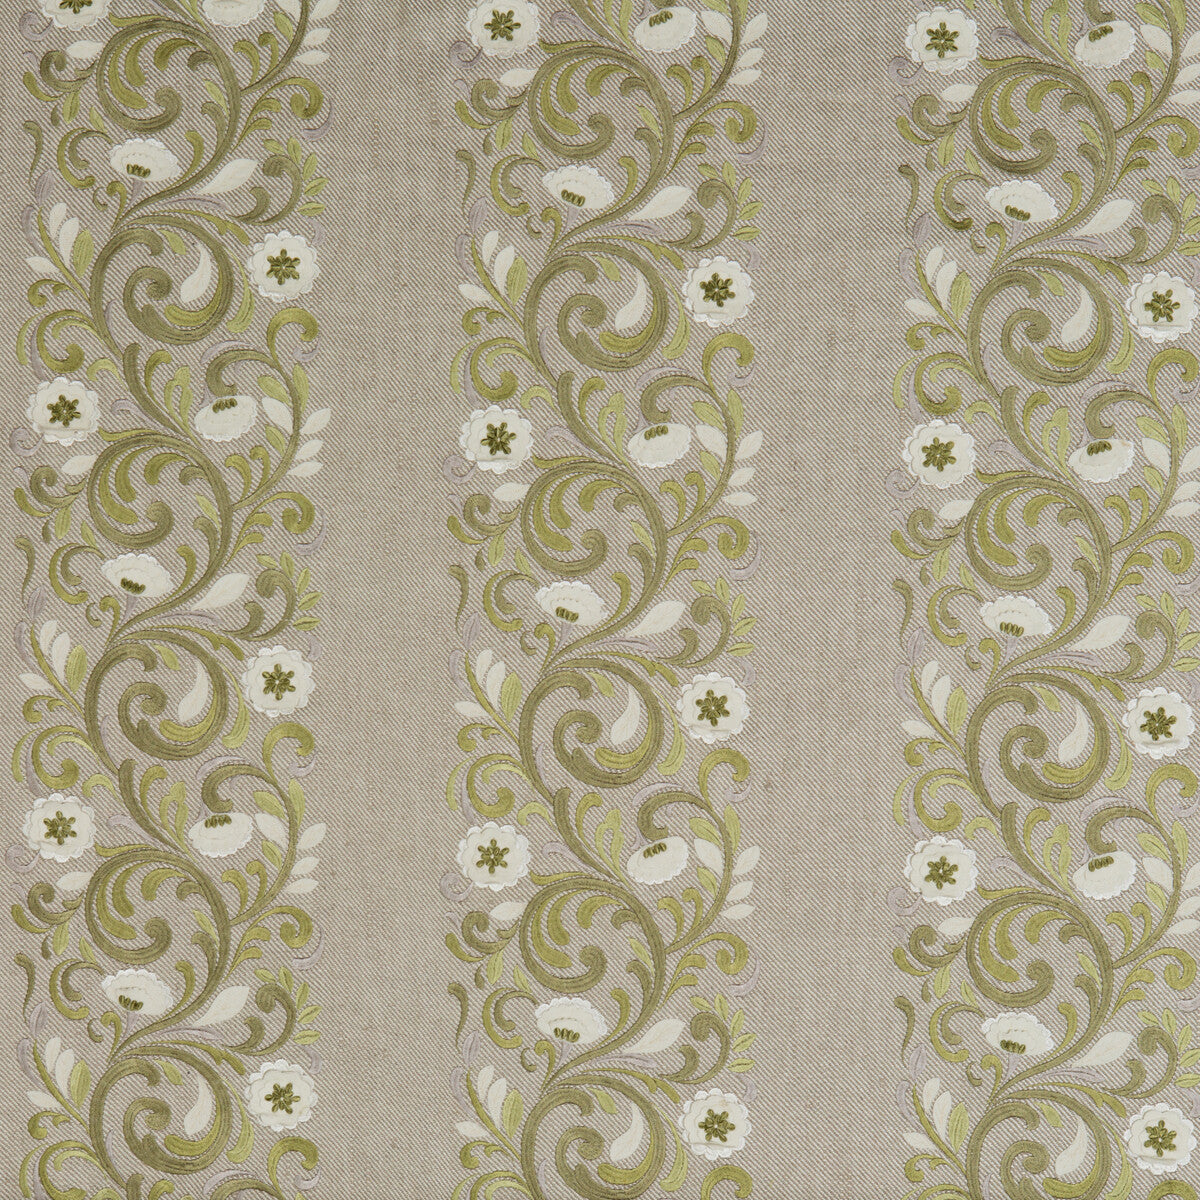 Langdale fabric in willow color - pattern BF10538.2.0 - by G P &amp; J Baker in the Langdale collection